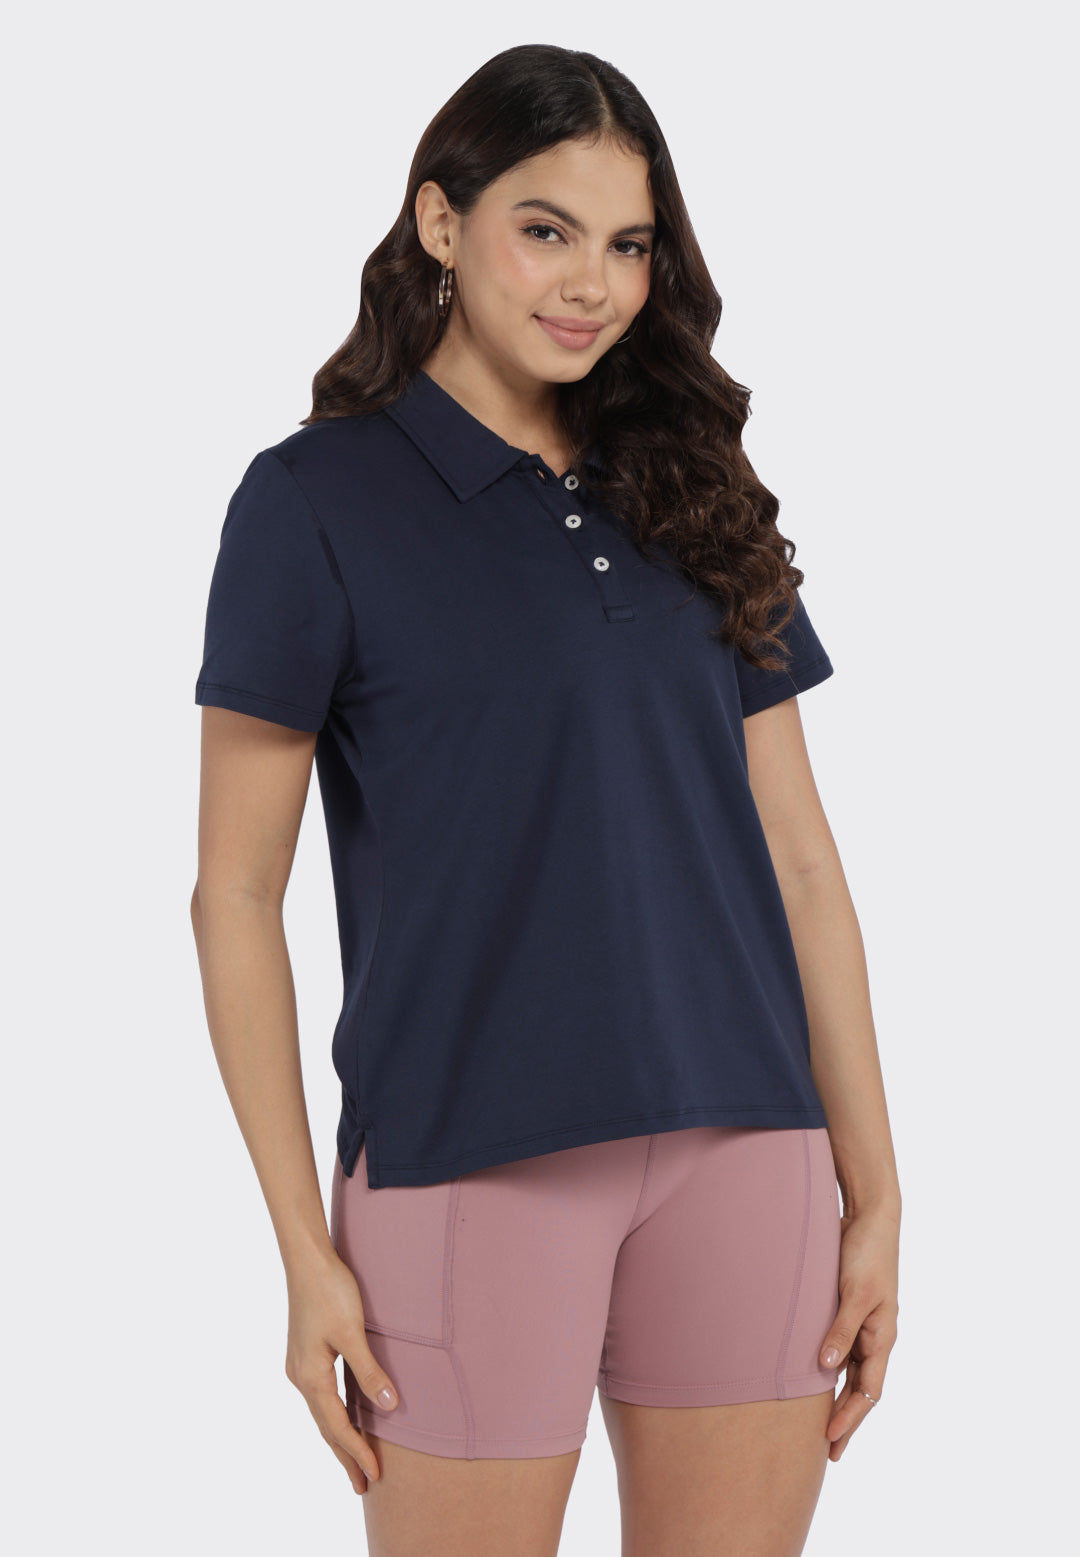 Buy Loose T-Shirts for Women & Girls Online from Blissclub